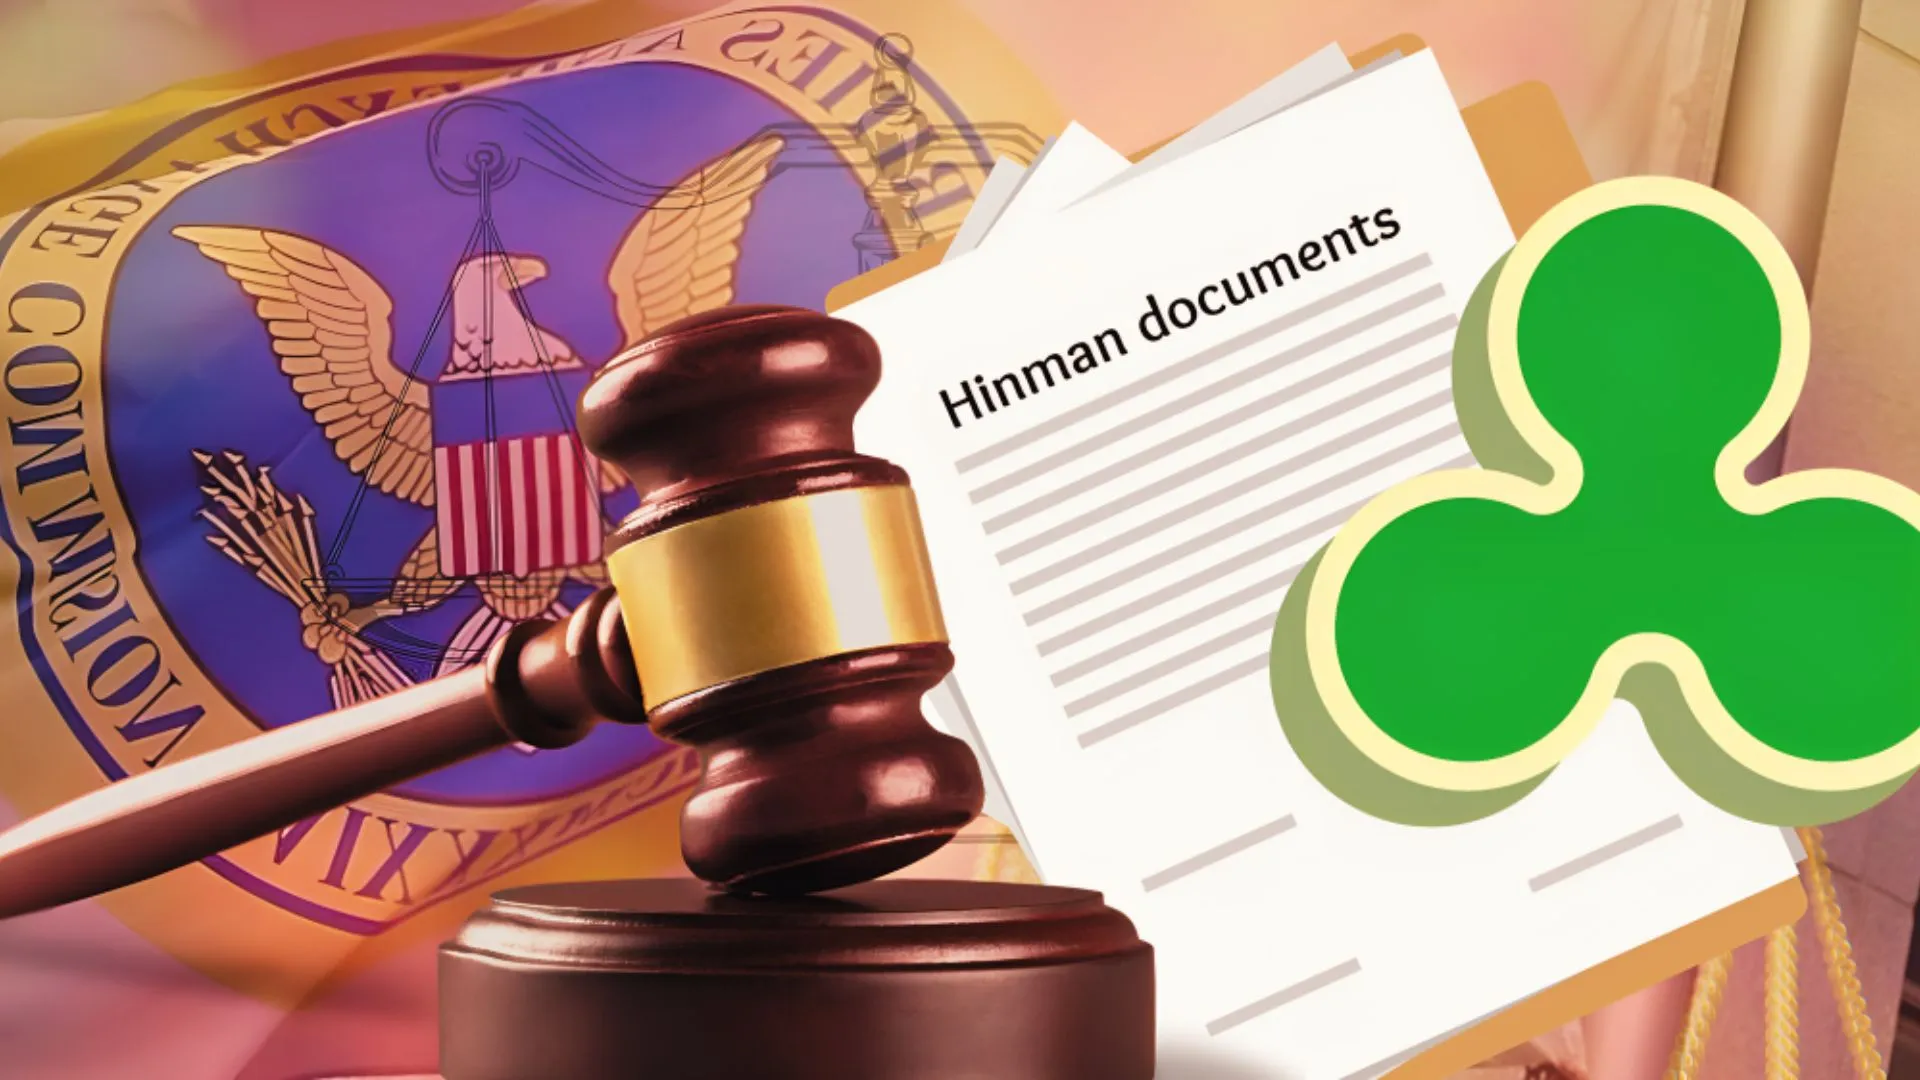 Hinman Papers in the Ripple Case Pose Questions About SEC’s Aims